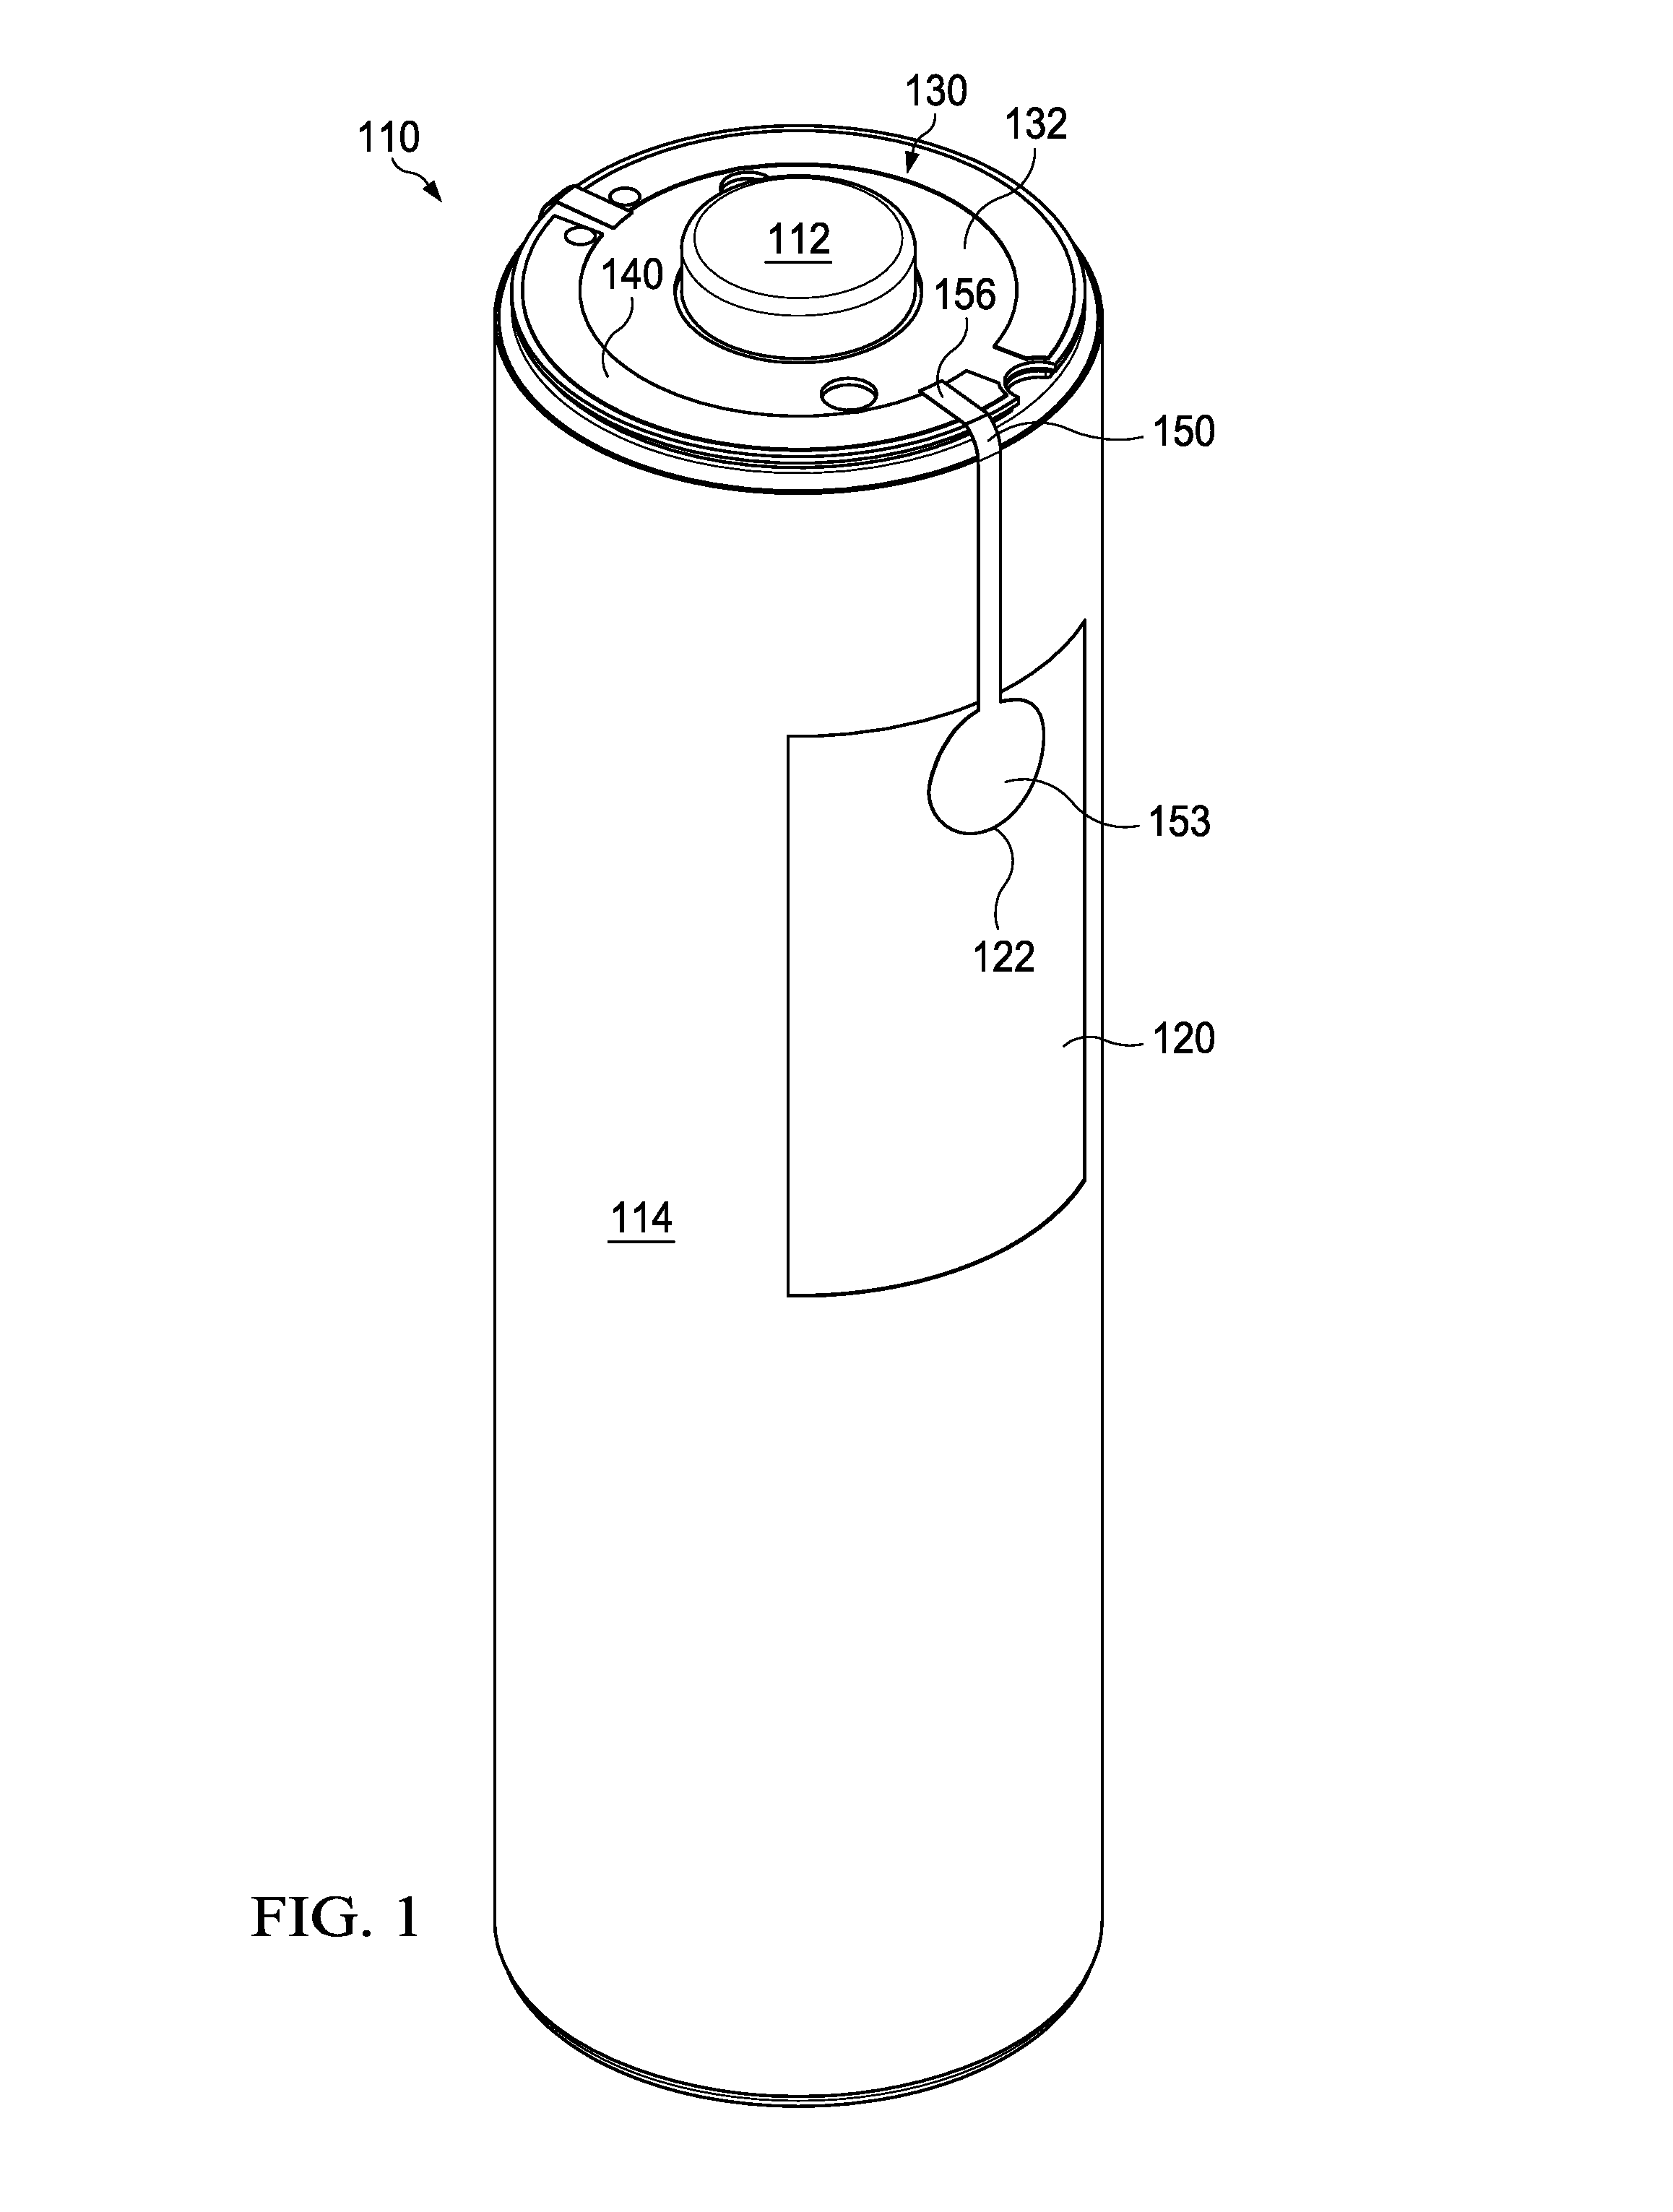 Battery including an on-cell indicator